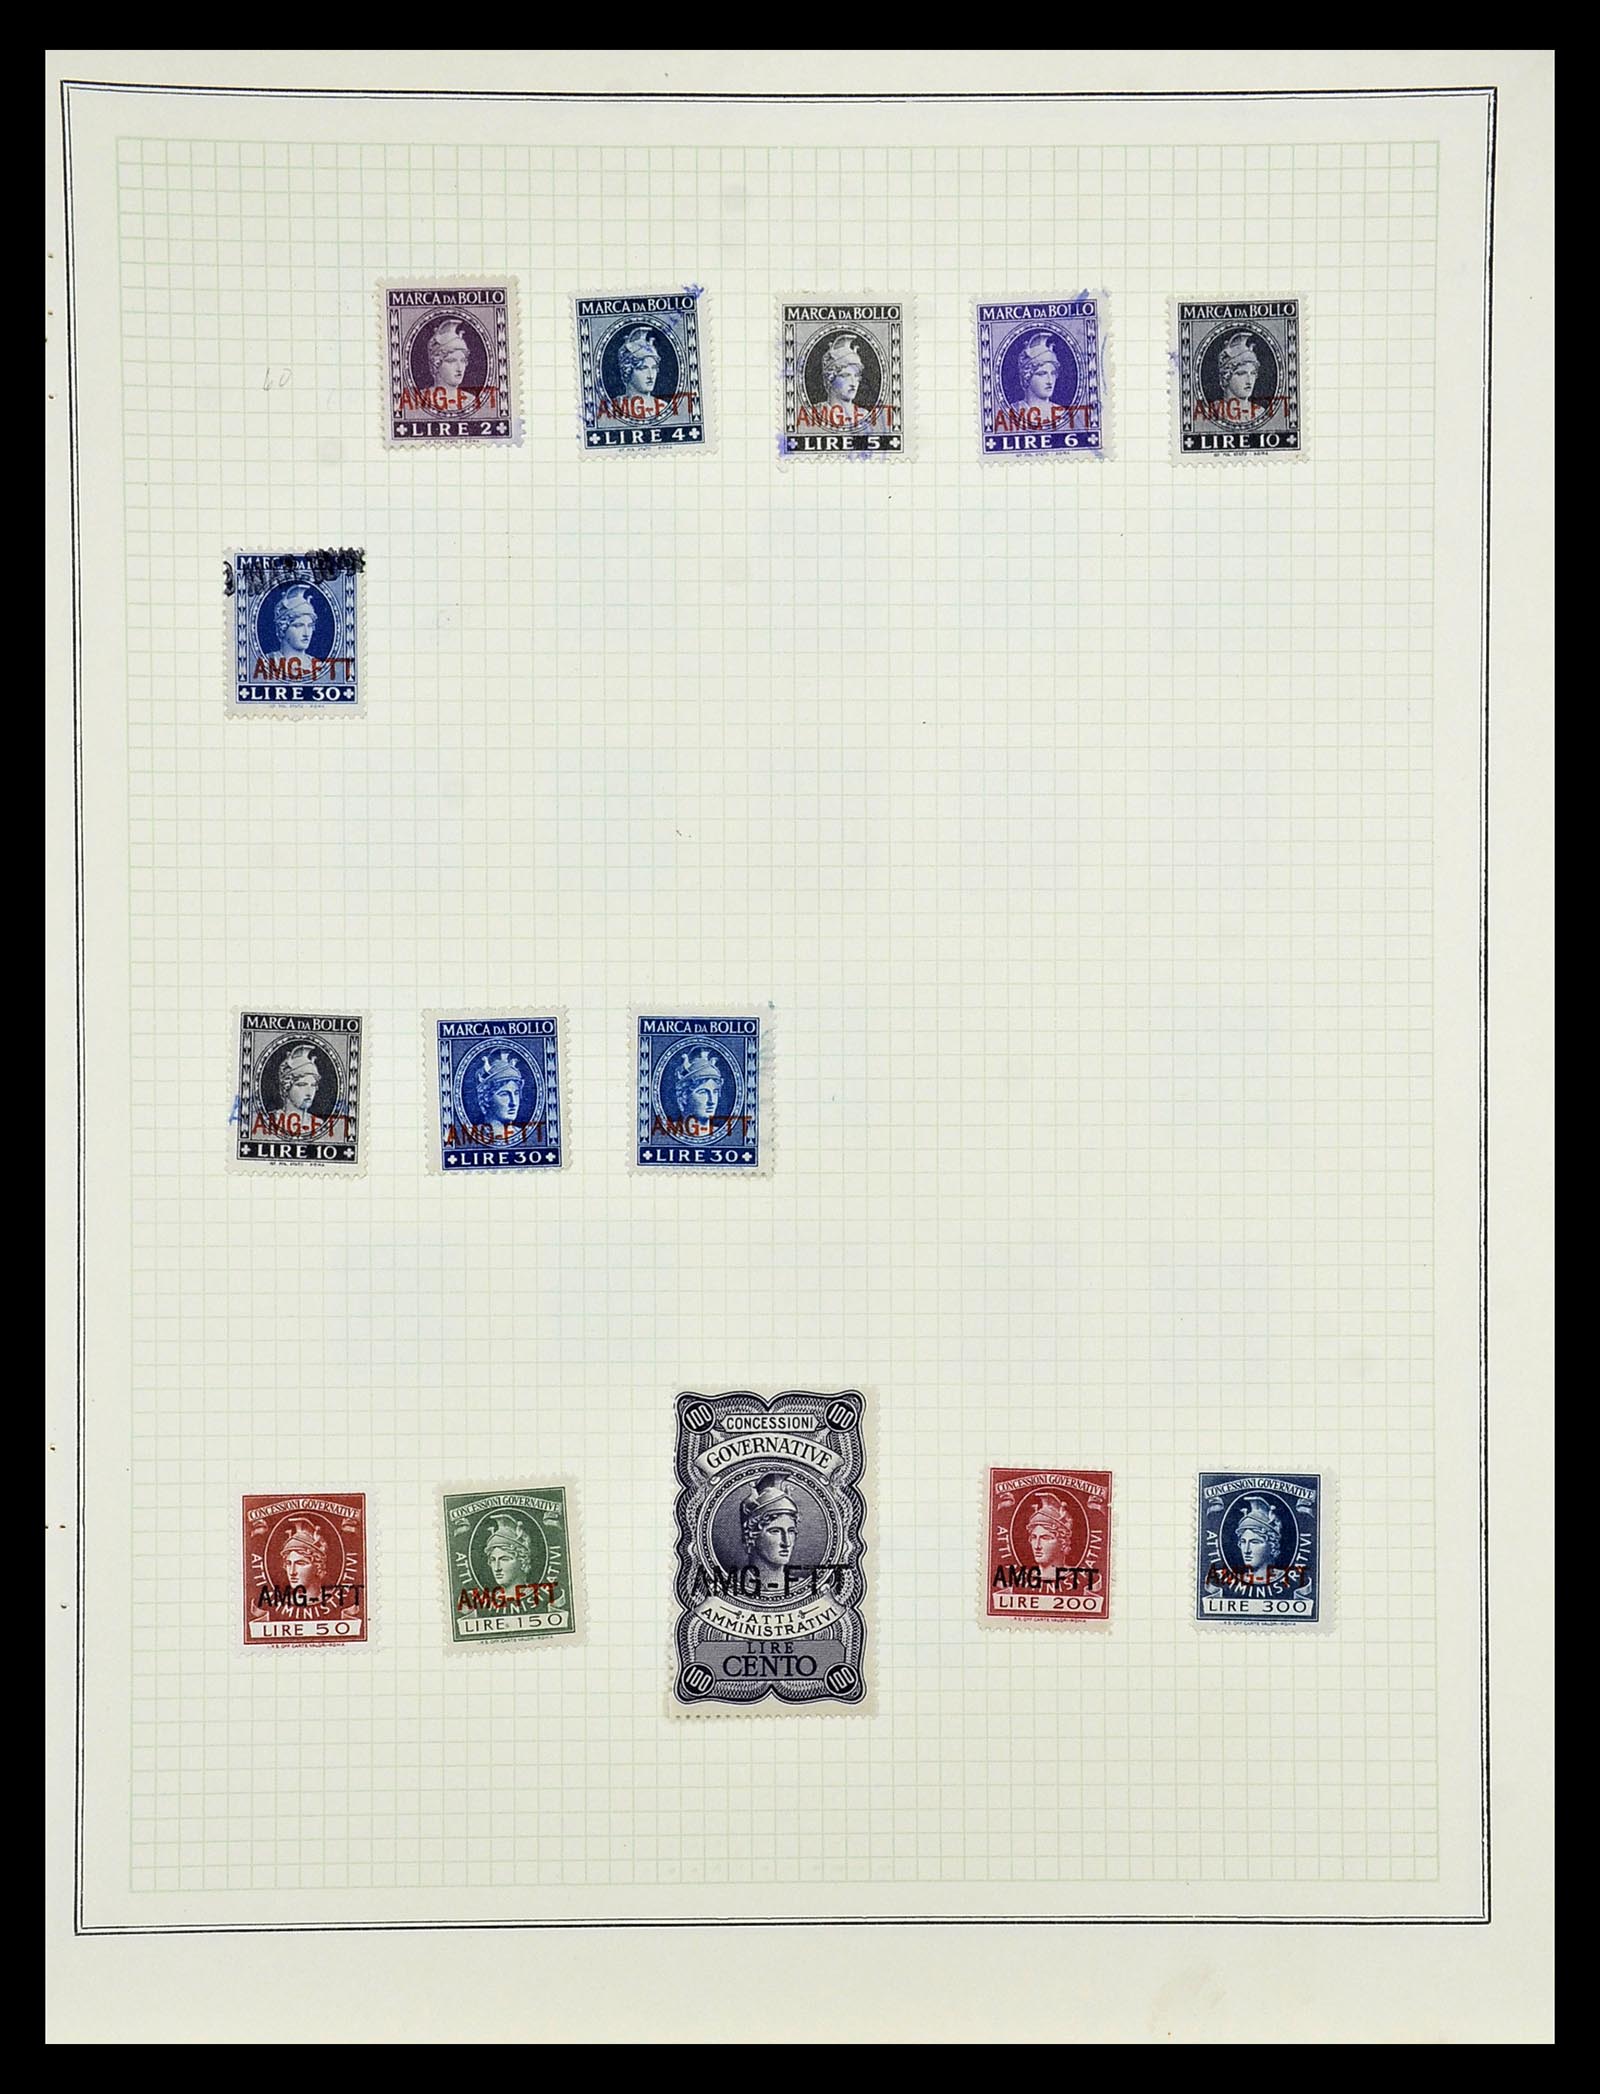 35109 033 - Stamp Collection 35109 AMG 1943-1952.